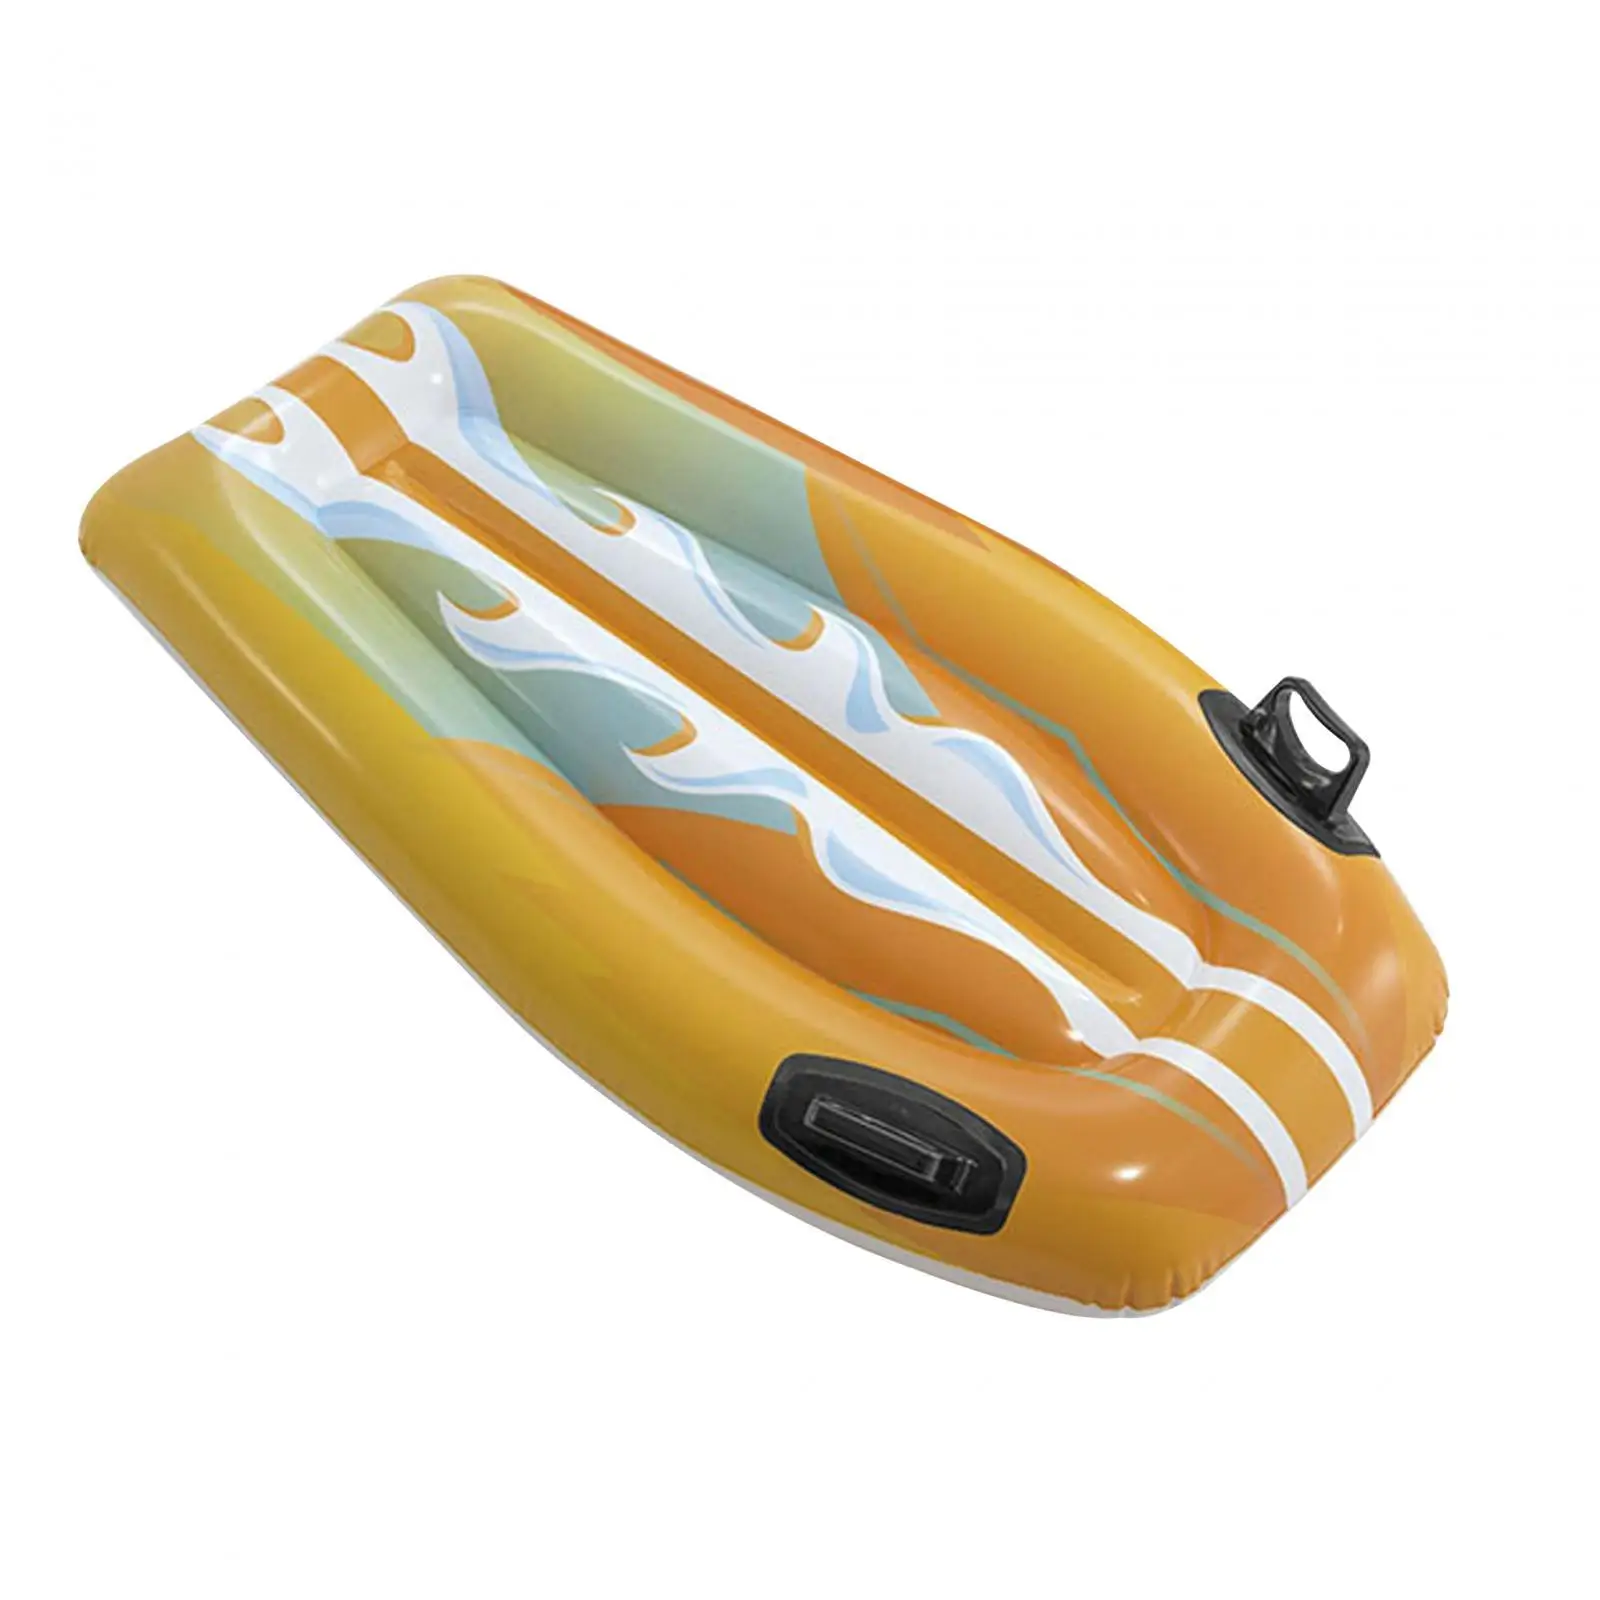 Inflatable Surfboard for Kids Beach Party Floating Surfboard for Slip and Slide Children Surf Board Pool Float with Handle